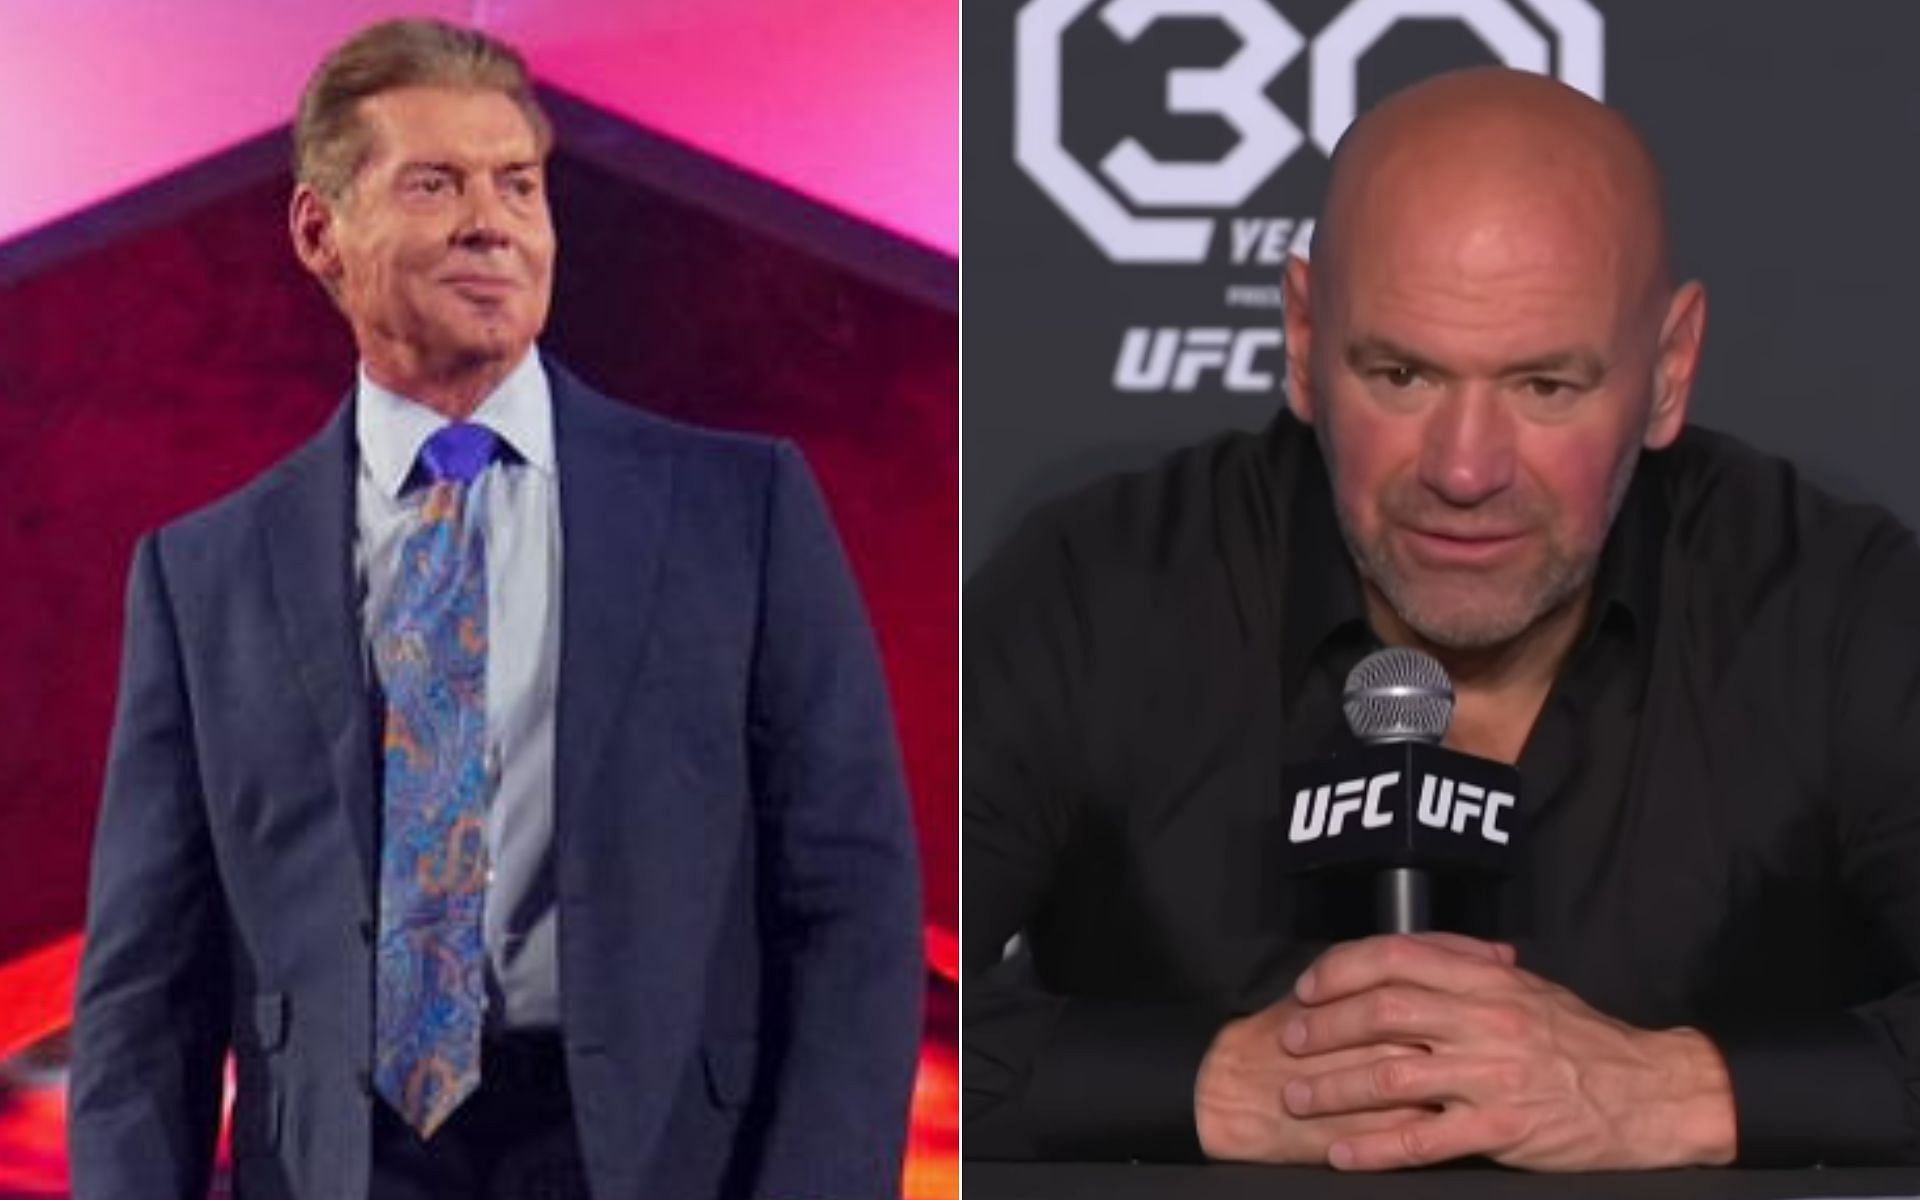 Vince McMahon [Left], and Dana White [Right] [Photo credit wwe.com and UFC - YouTube]